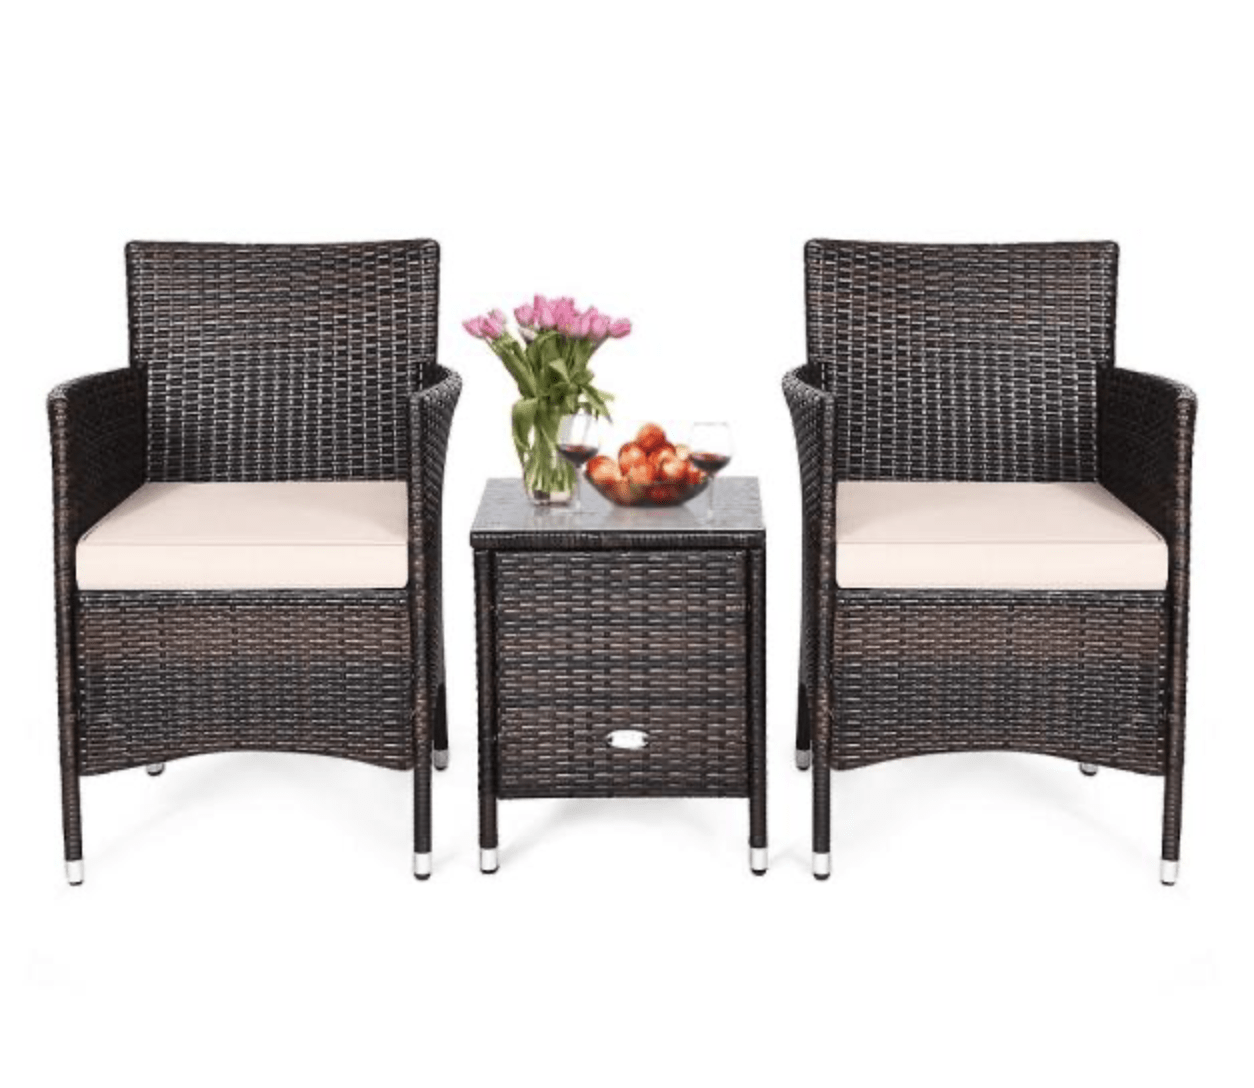 Clearance Patio Furniture - HSN In Melville, New York